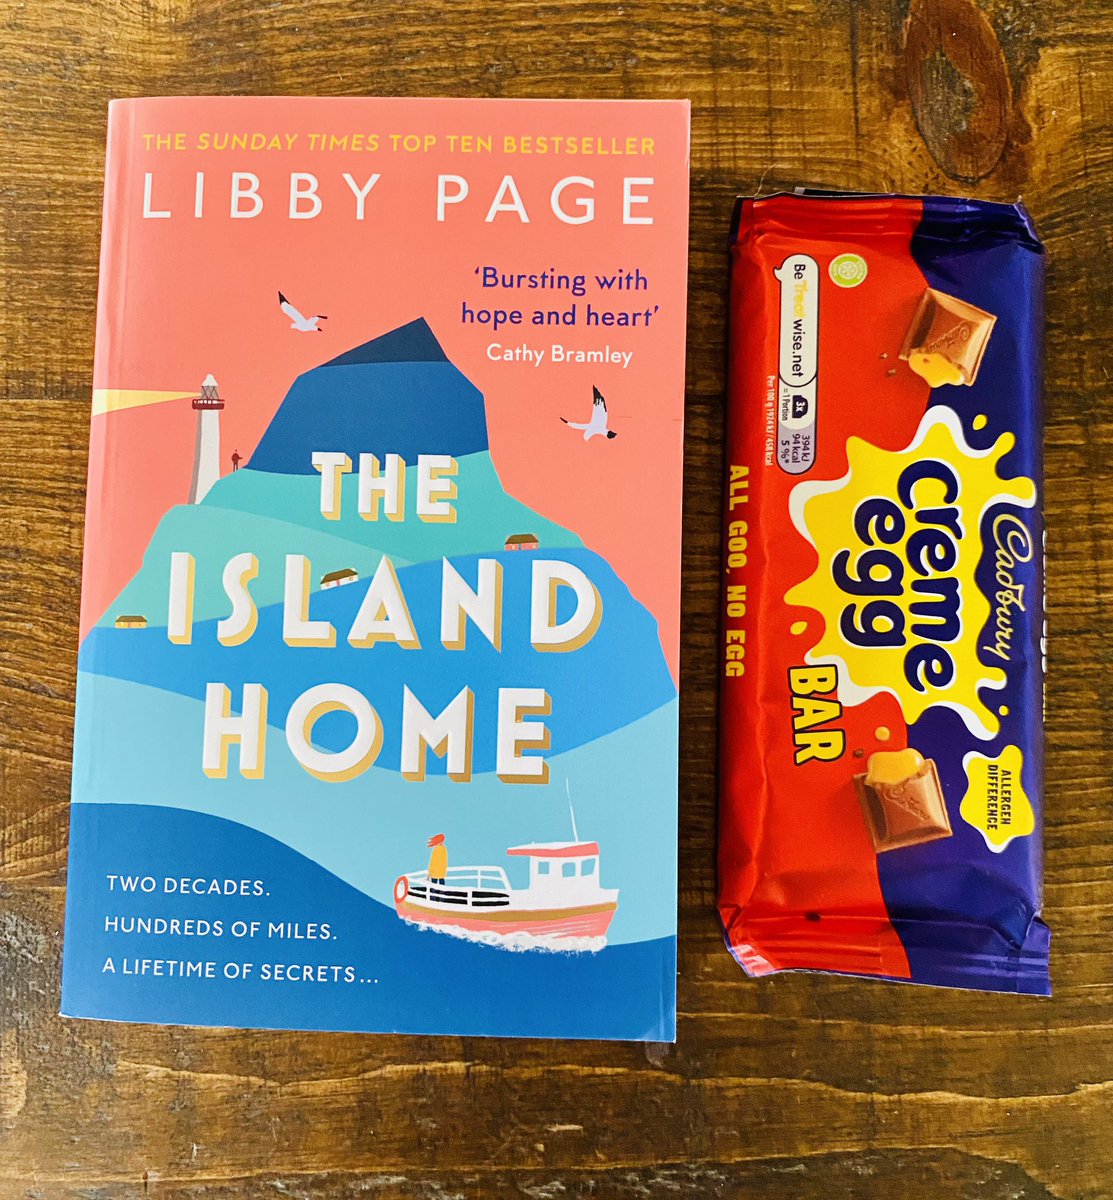 Hello everyone! Today you can win a copy of The Island Home and a creme egg bar. Repost & follow to enter. UK only. Closes tonight 28/03/24 at 11.59pm.